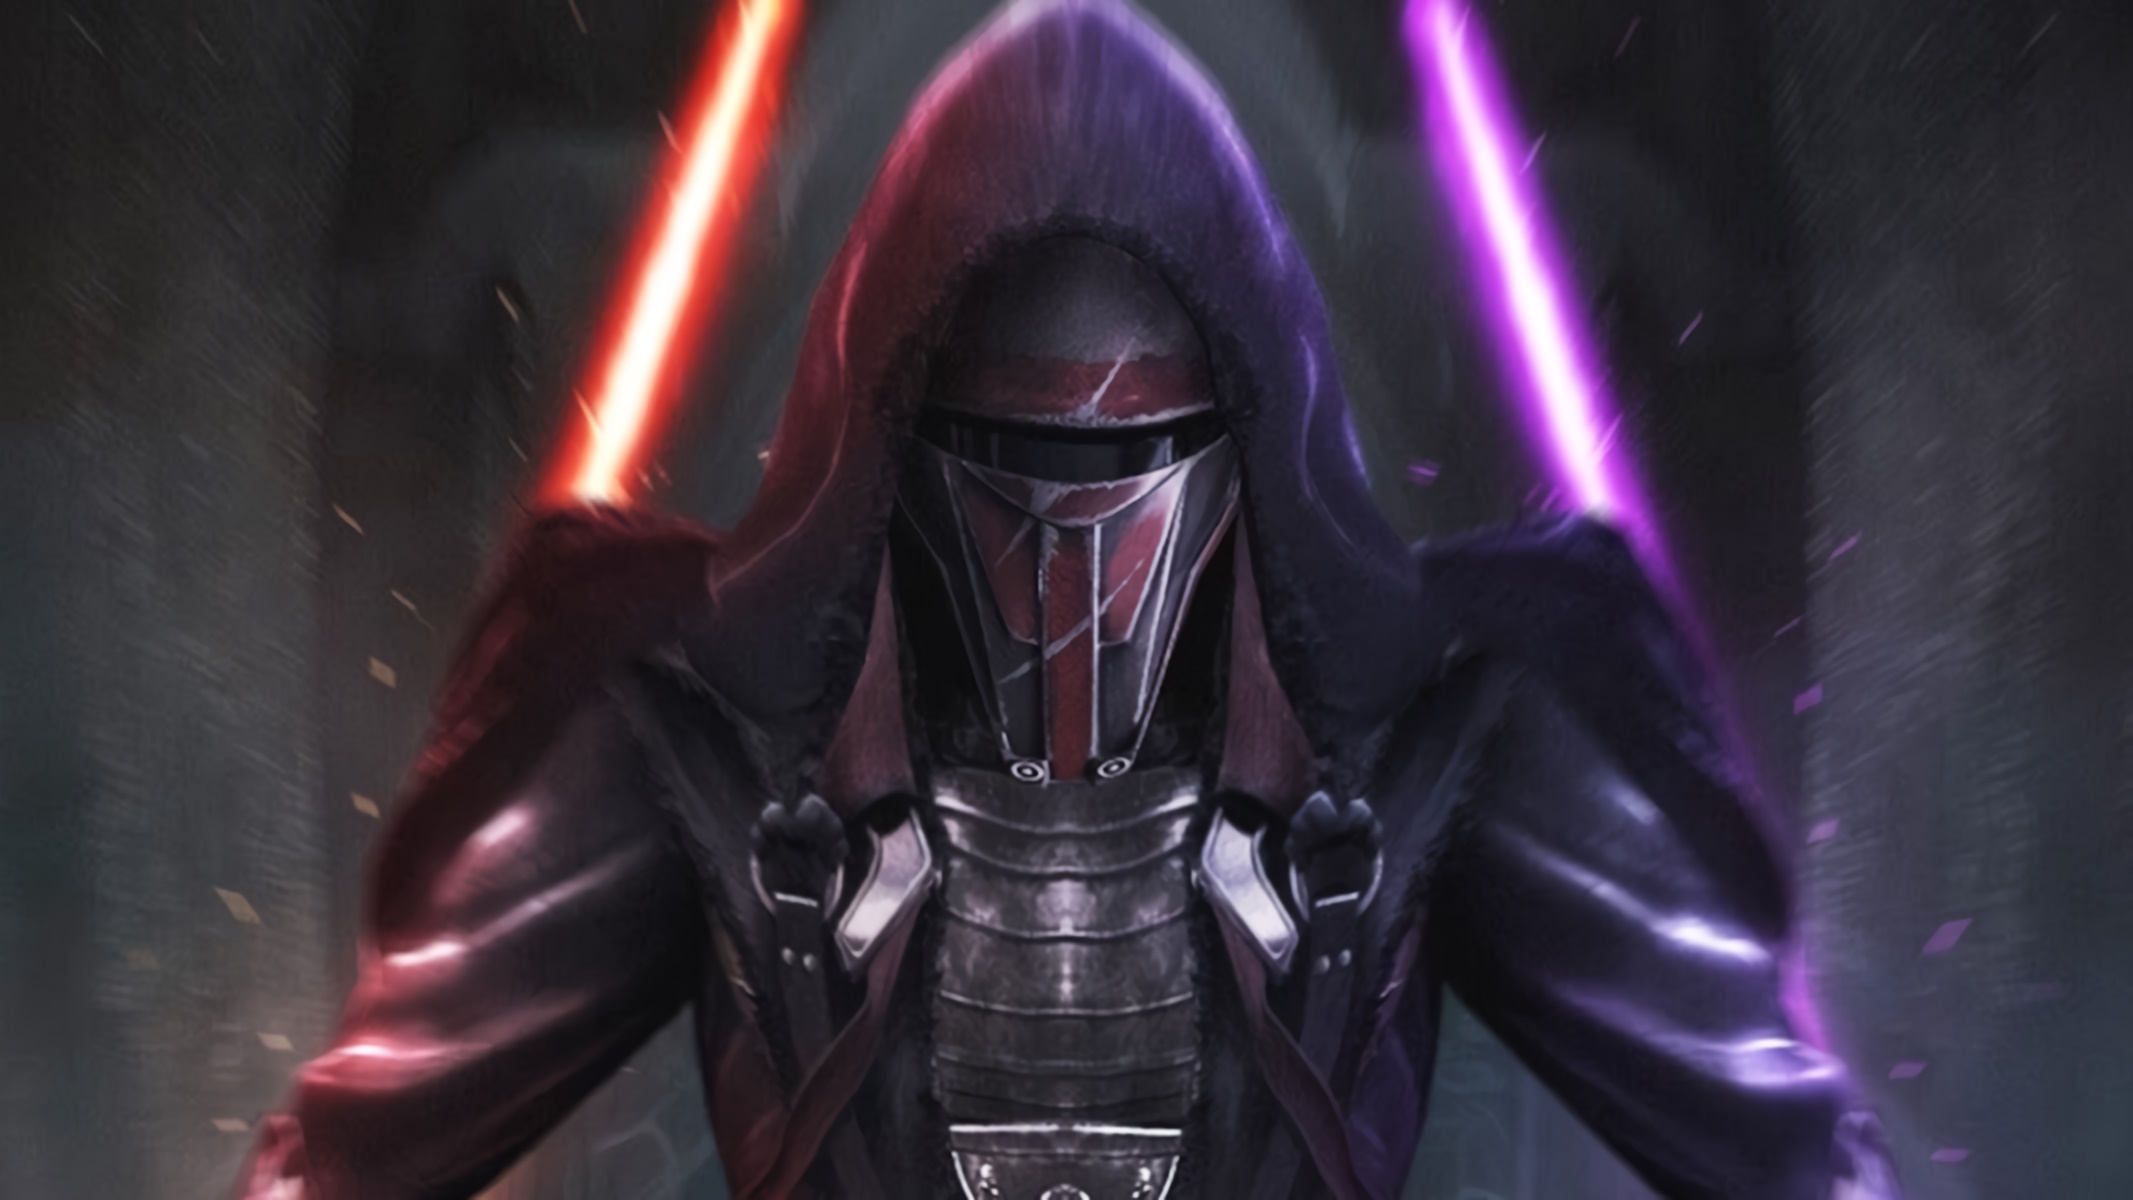 The Knight of the Old Republic